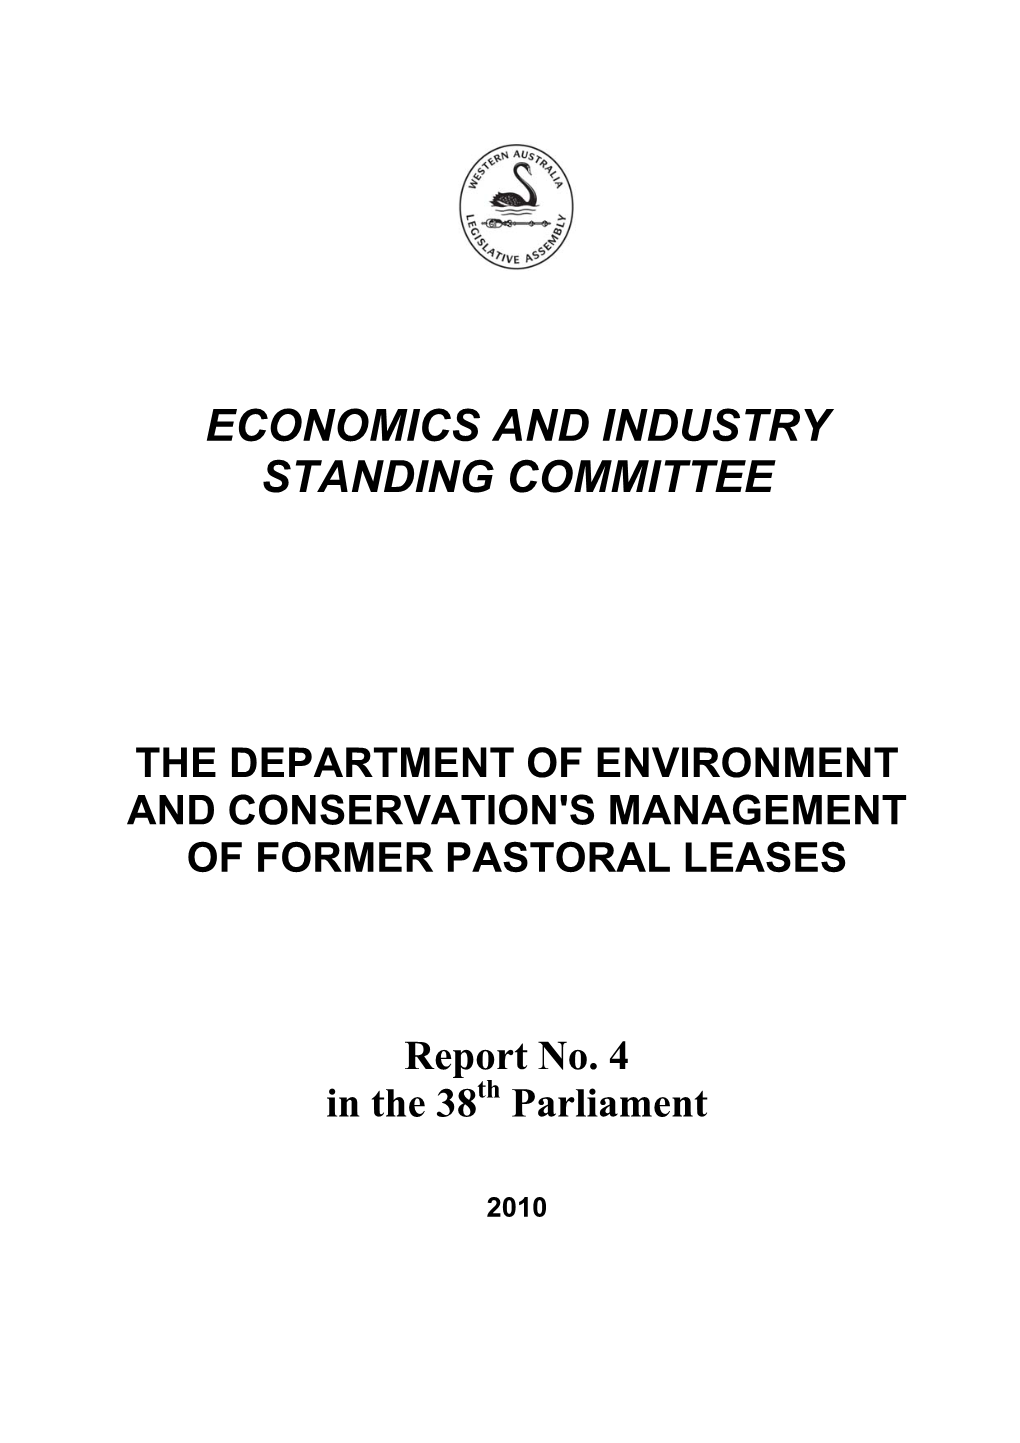 To View the Report